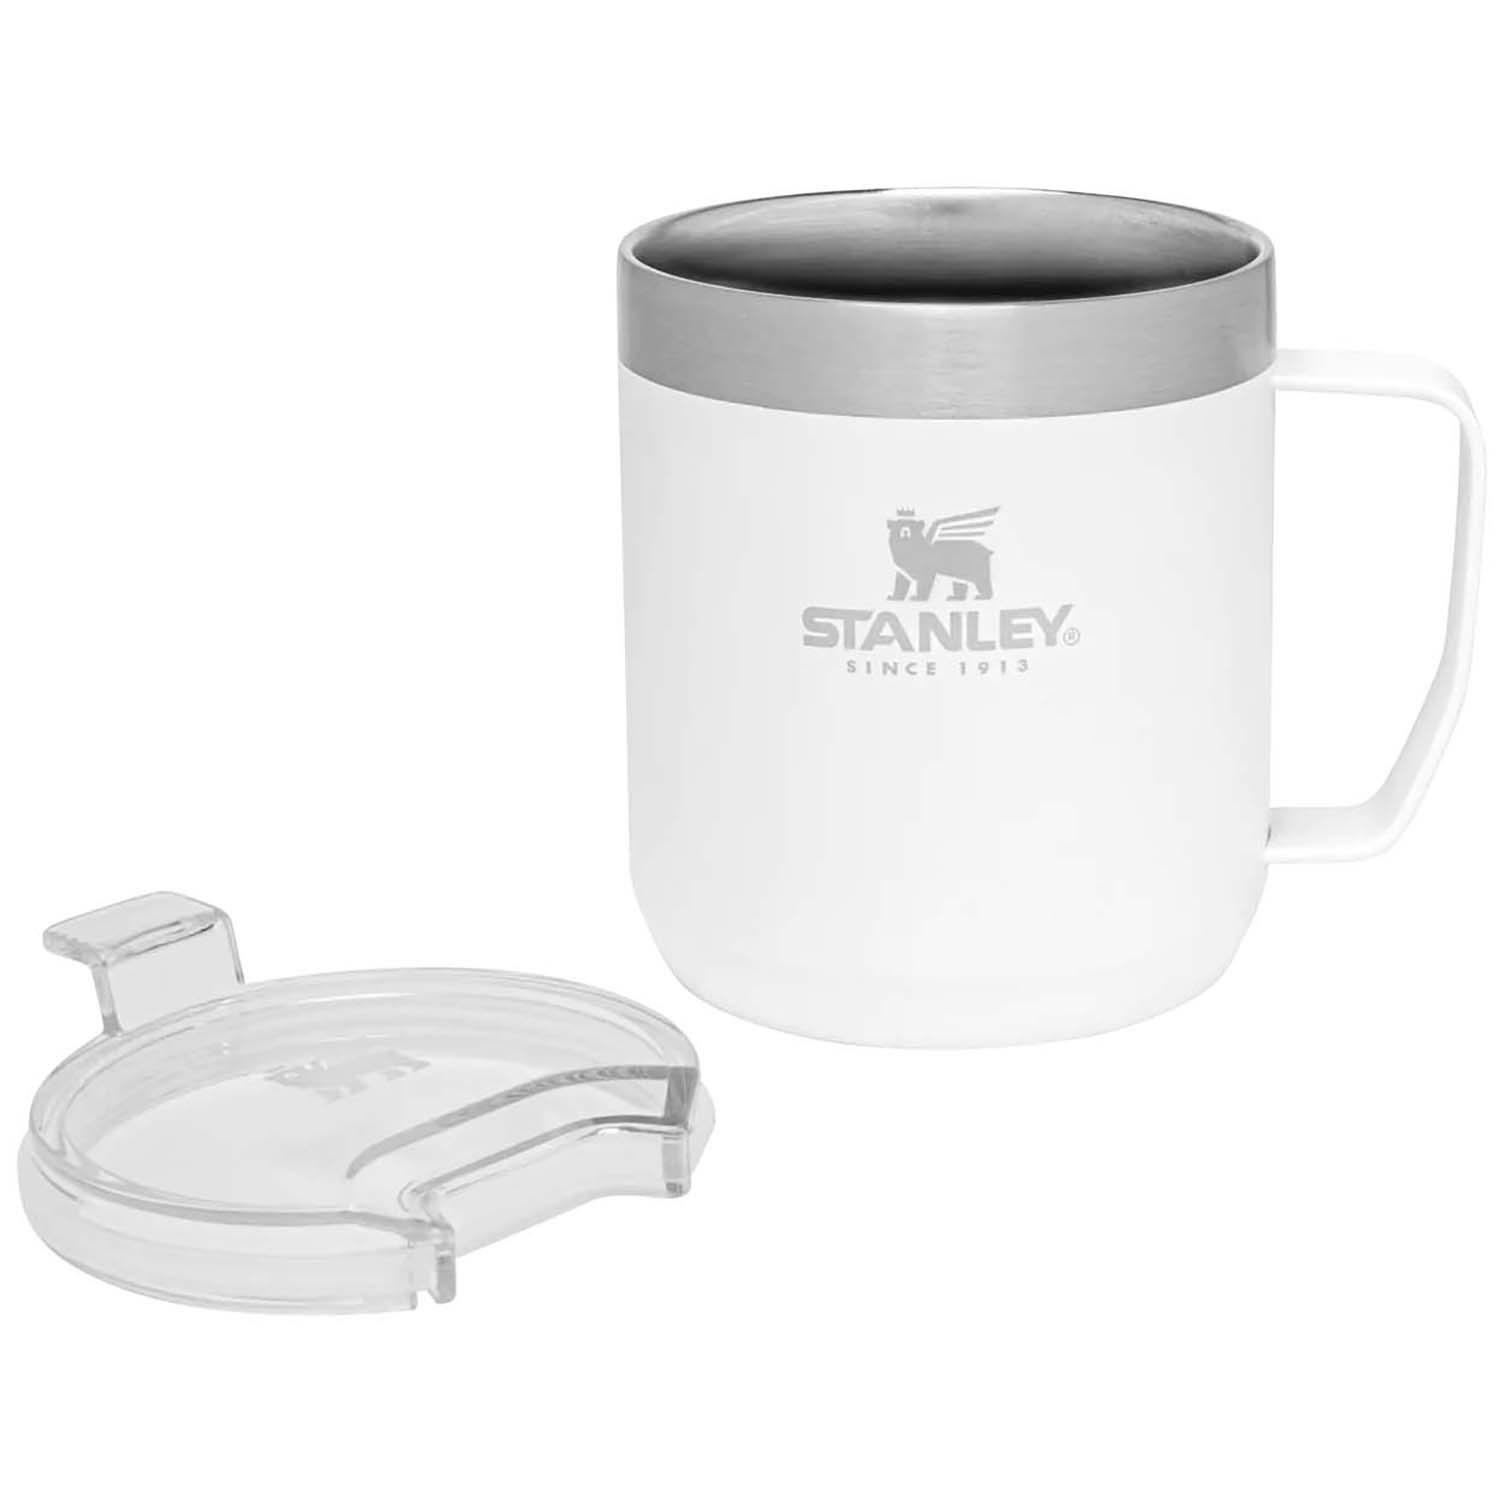 Level Up To The New 24 oz Camp Mug - Stanley